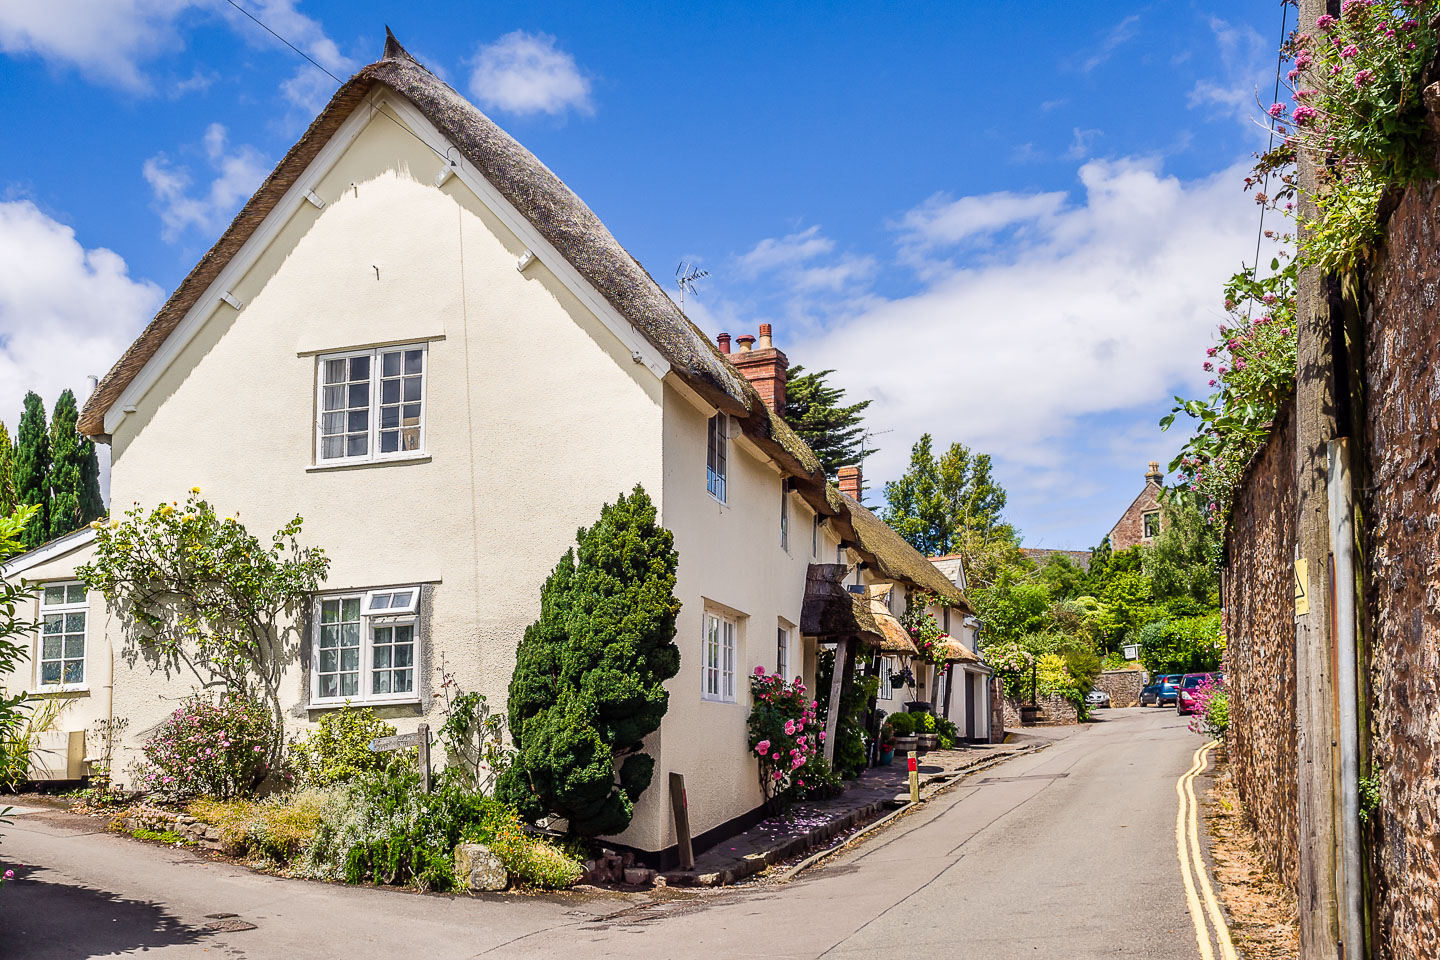 GB150047-E-Dunster-Streetview-with-cottages.jpg